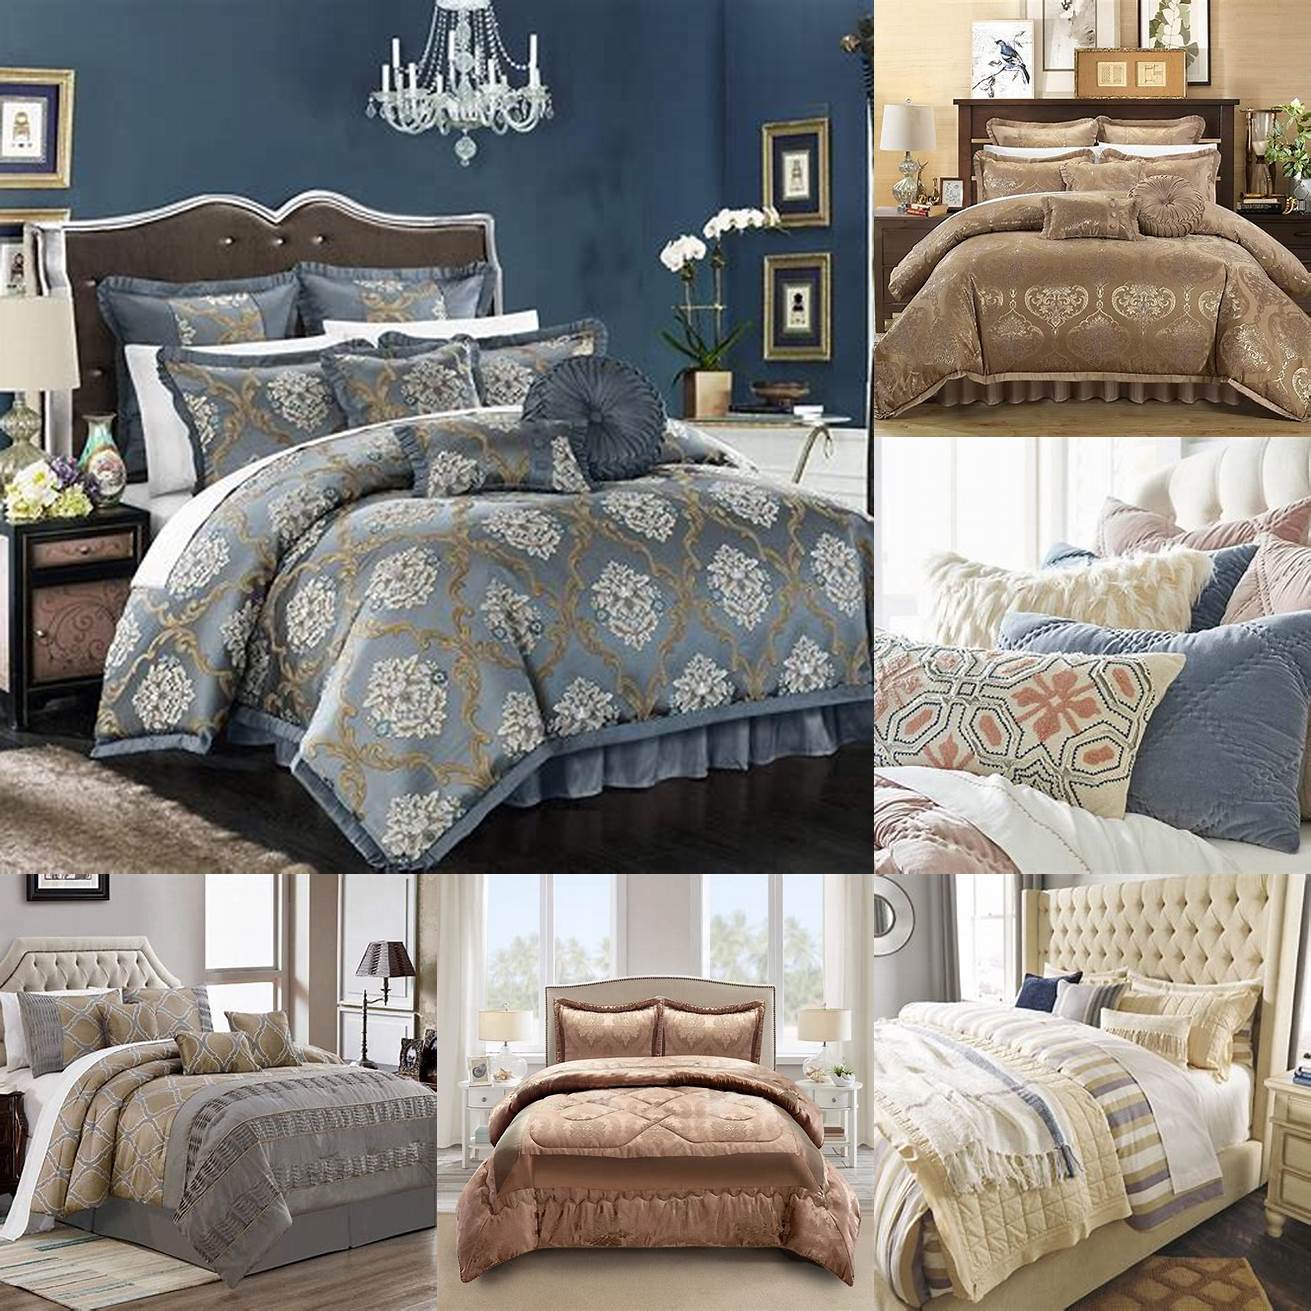 Choose bedding and accessories that complement your upholstered bed such as throw pillows or a matching bedspread